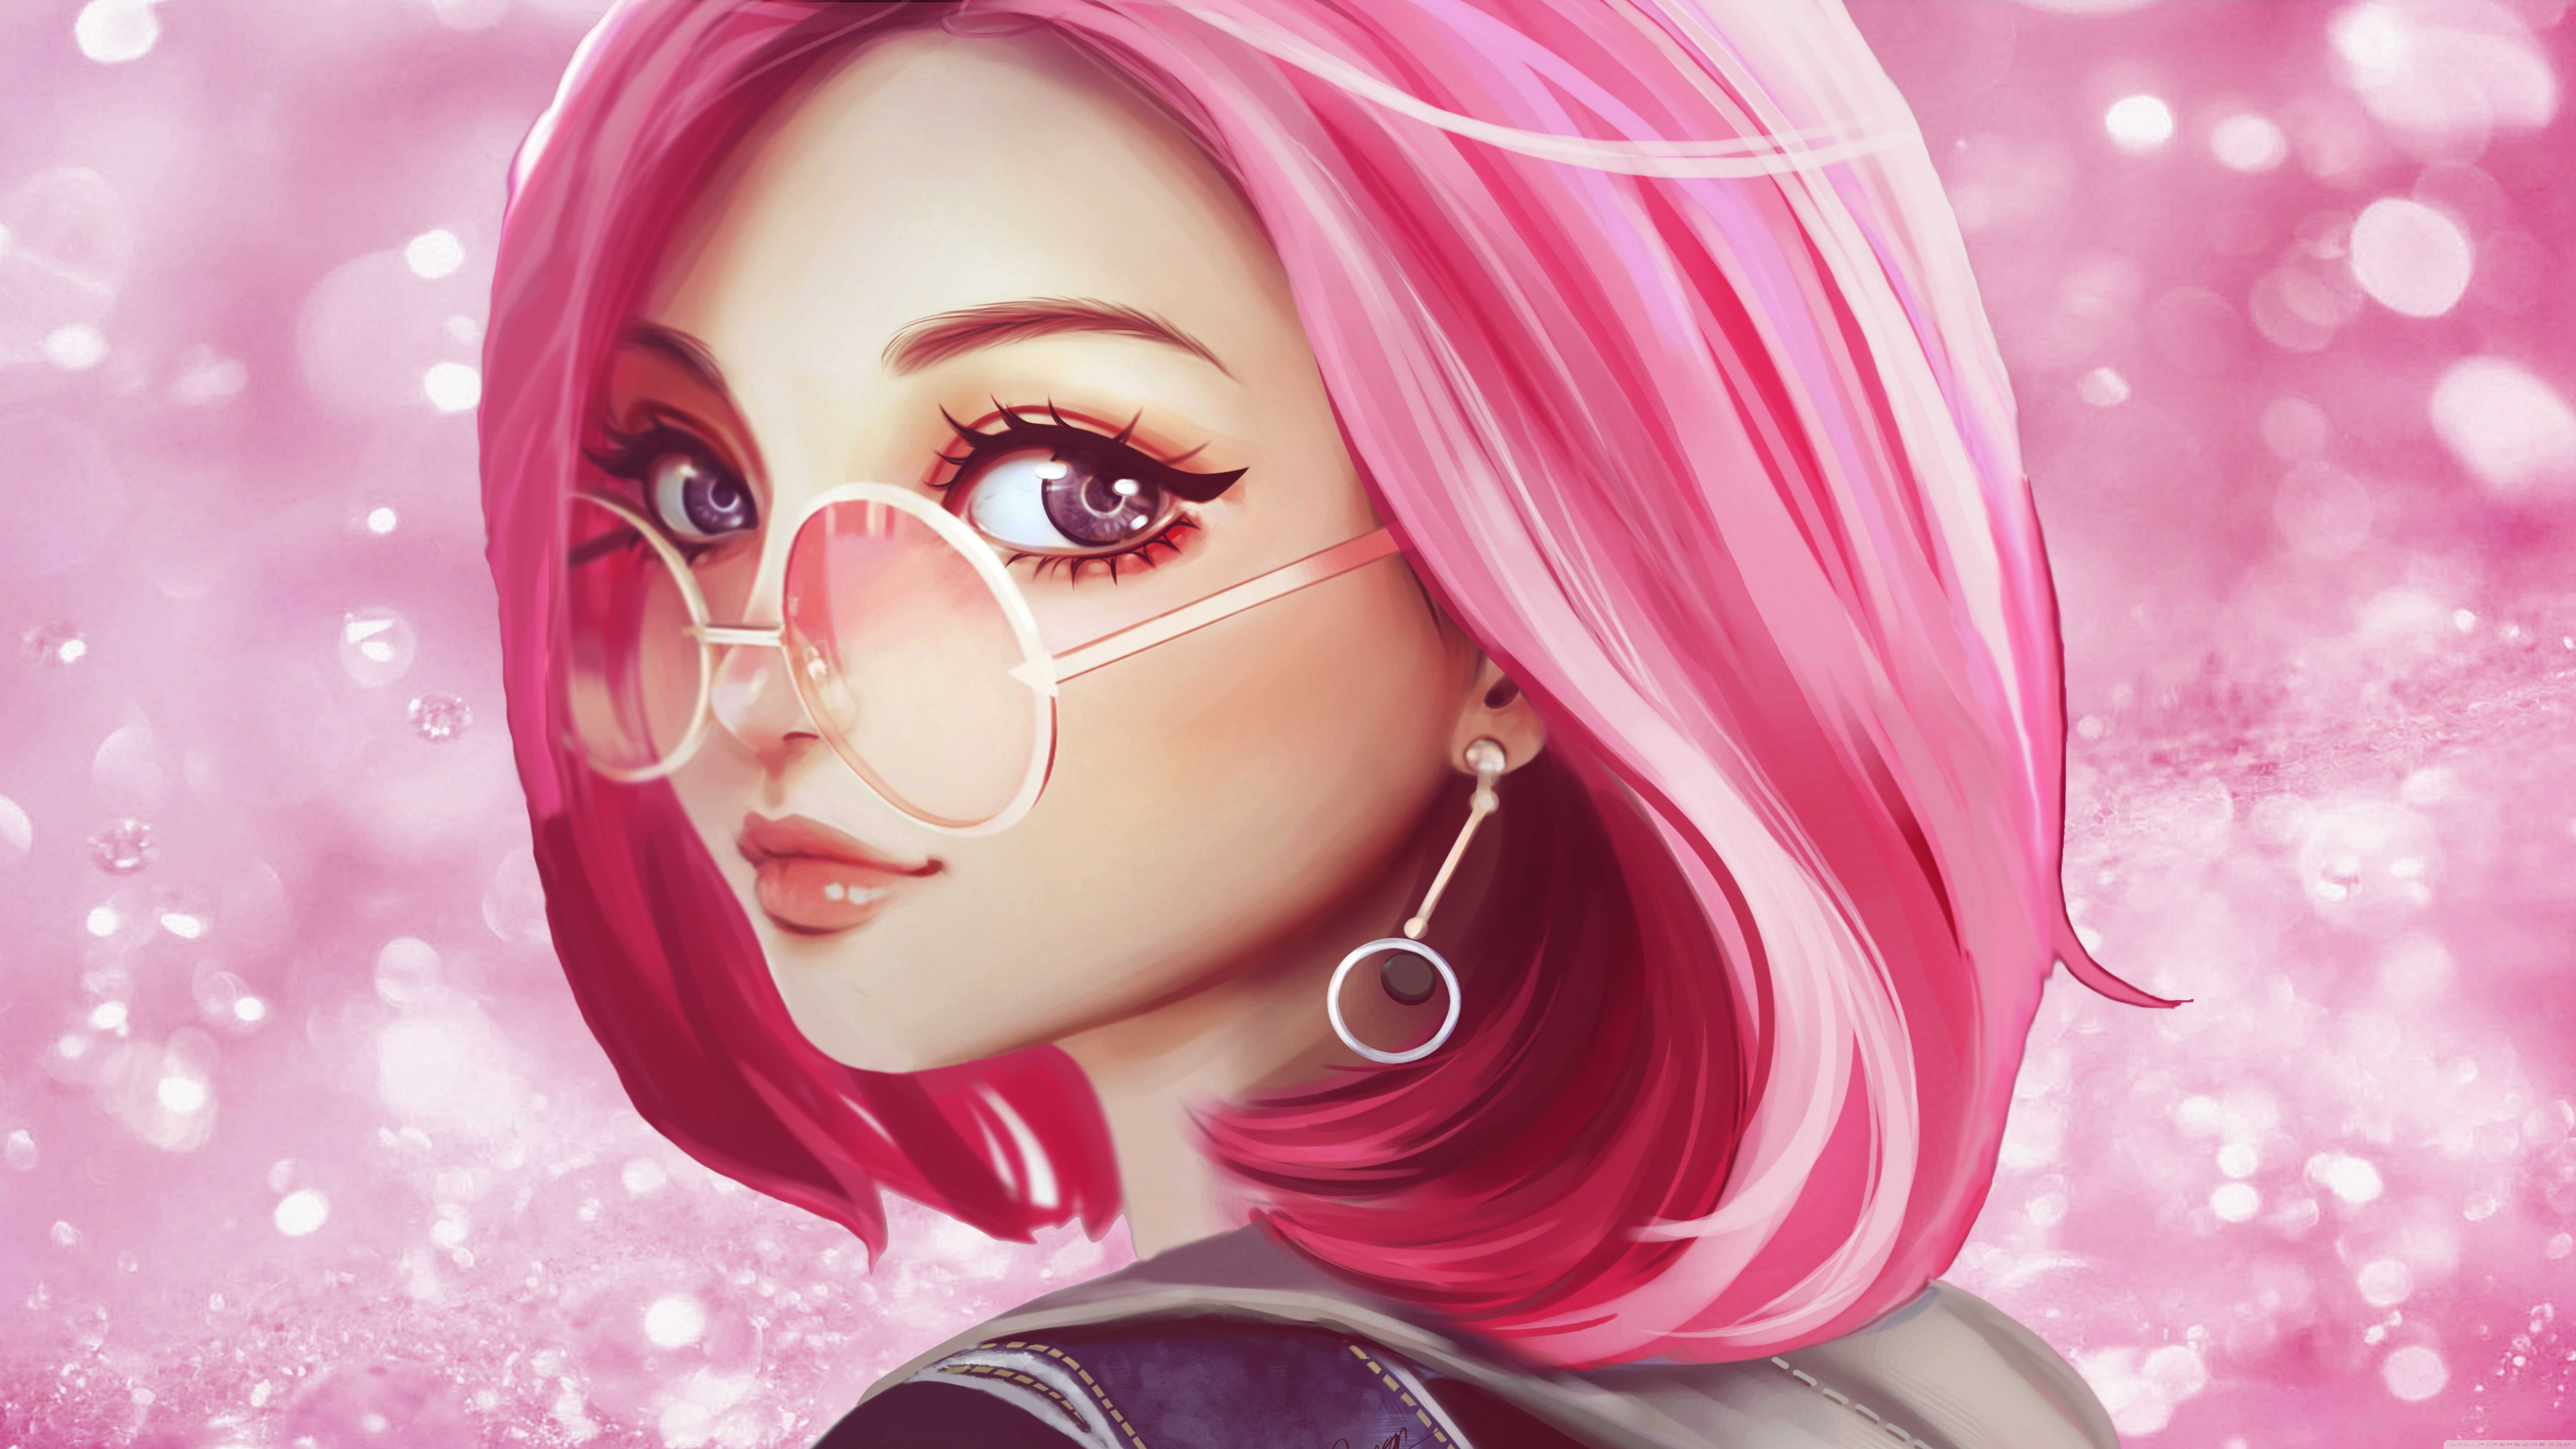 Random Girl With Pink Hair Wallpapers Wallpaper Cave